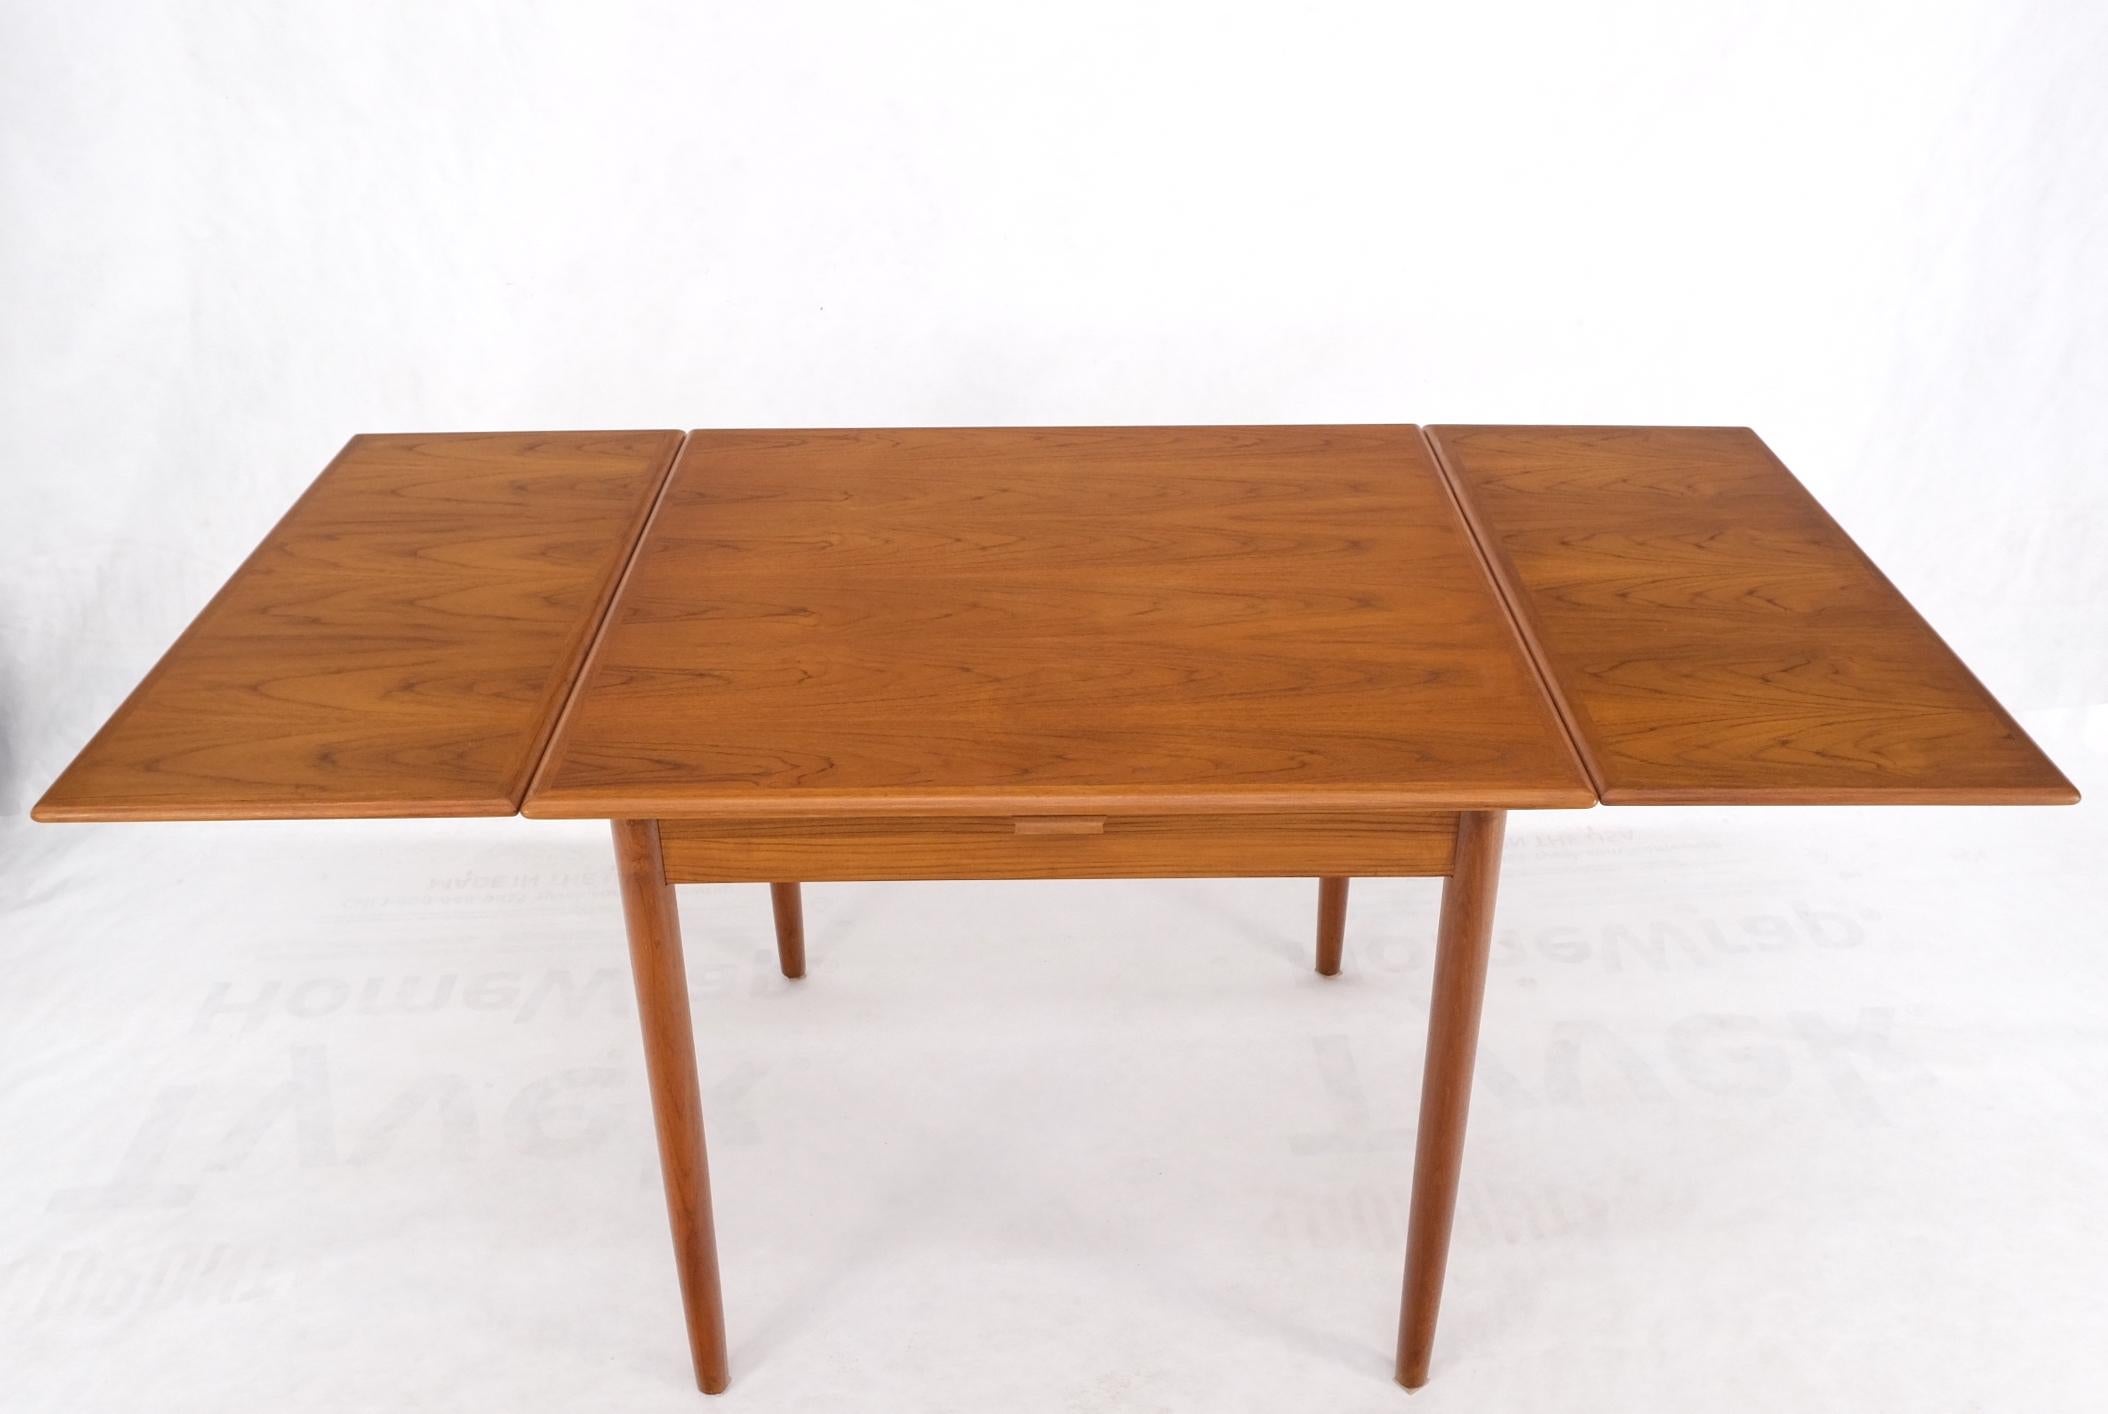 Danish Mid-Century Modern Square Teak Refectory Extension Boards Dining Table For Sale 2